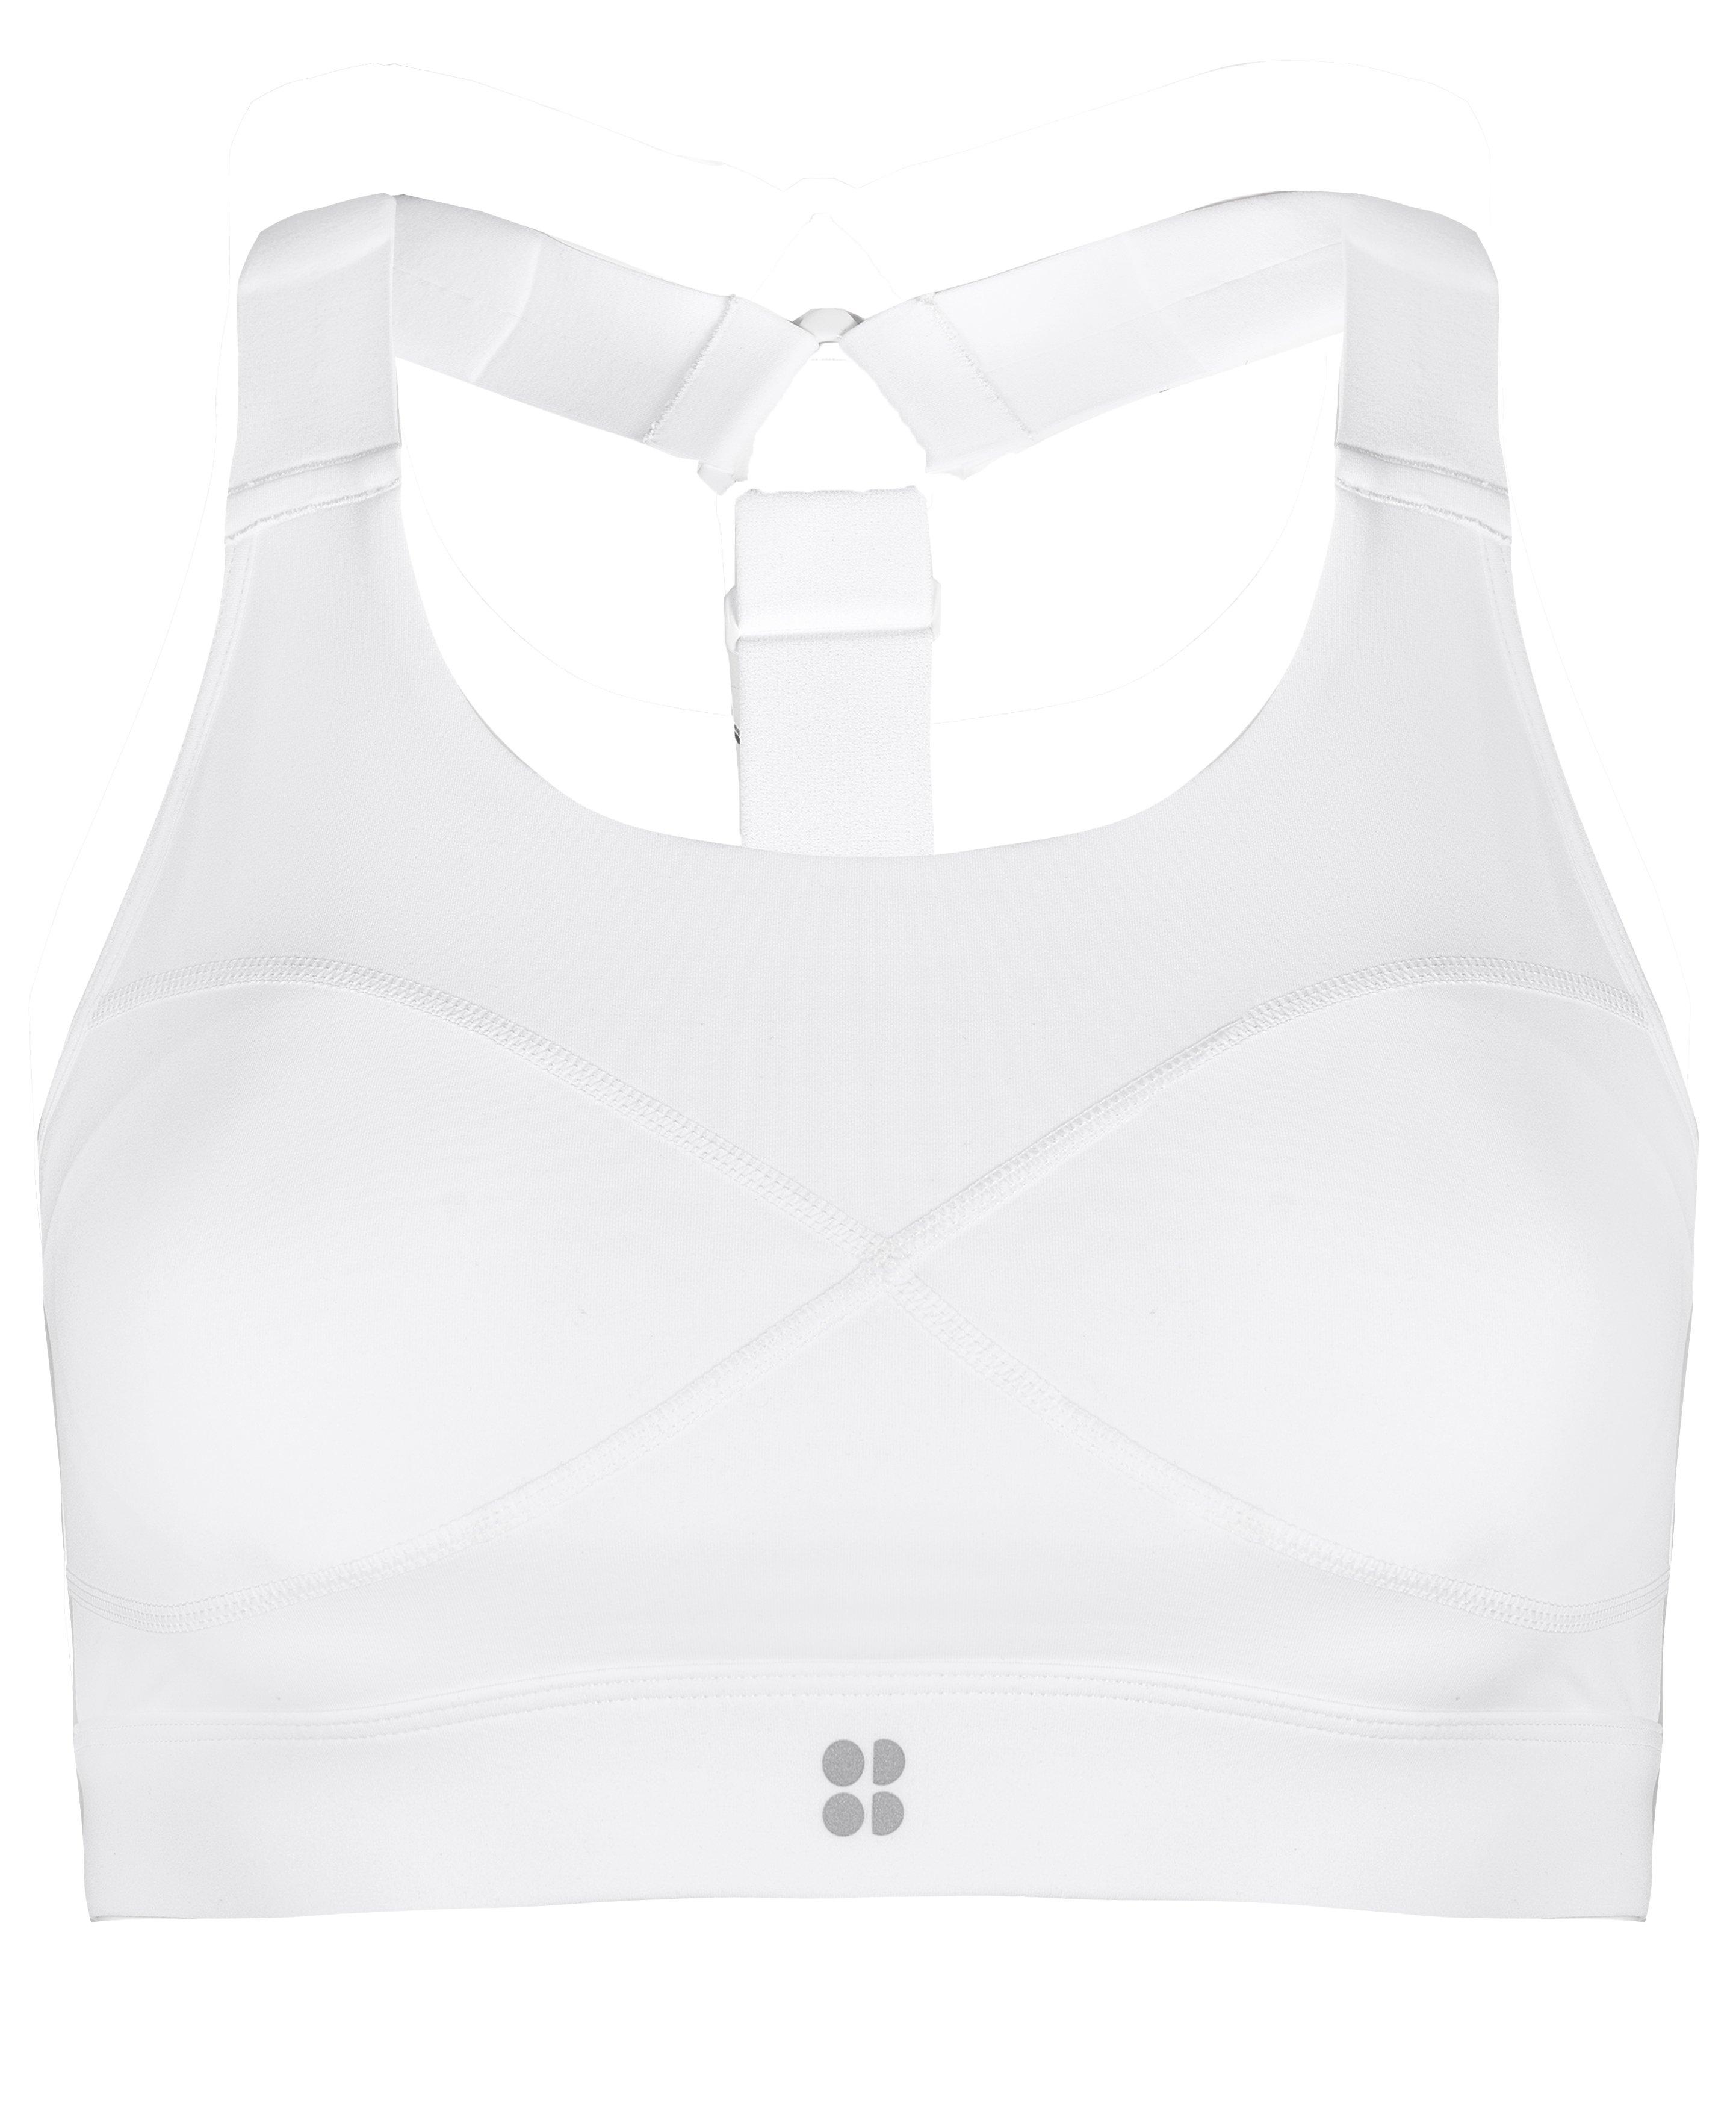 Sports Bras for Women, Low, Medium and High Impact